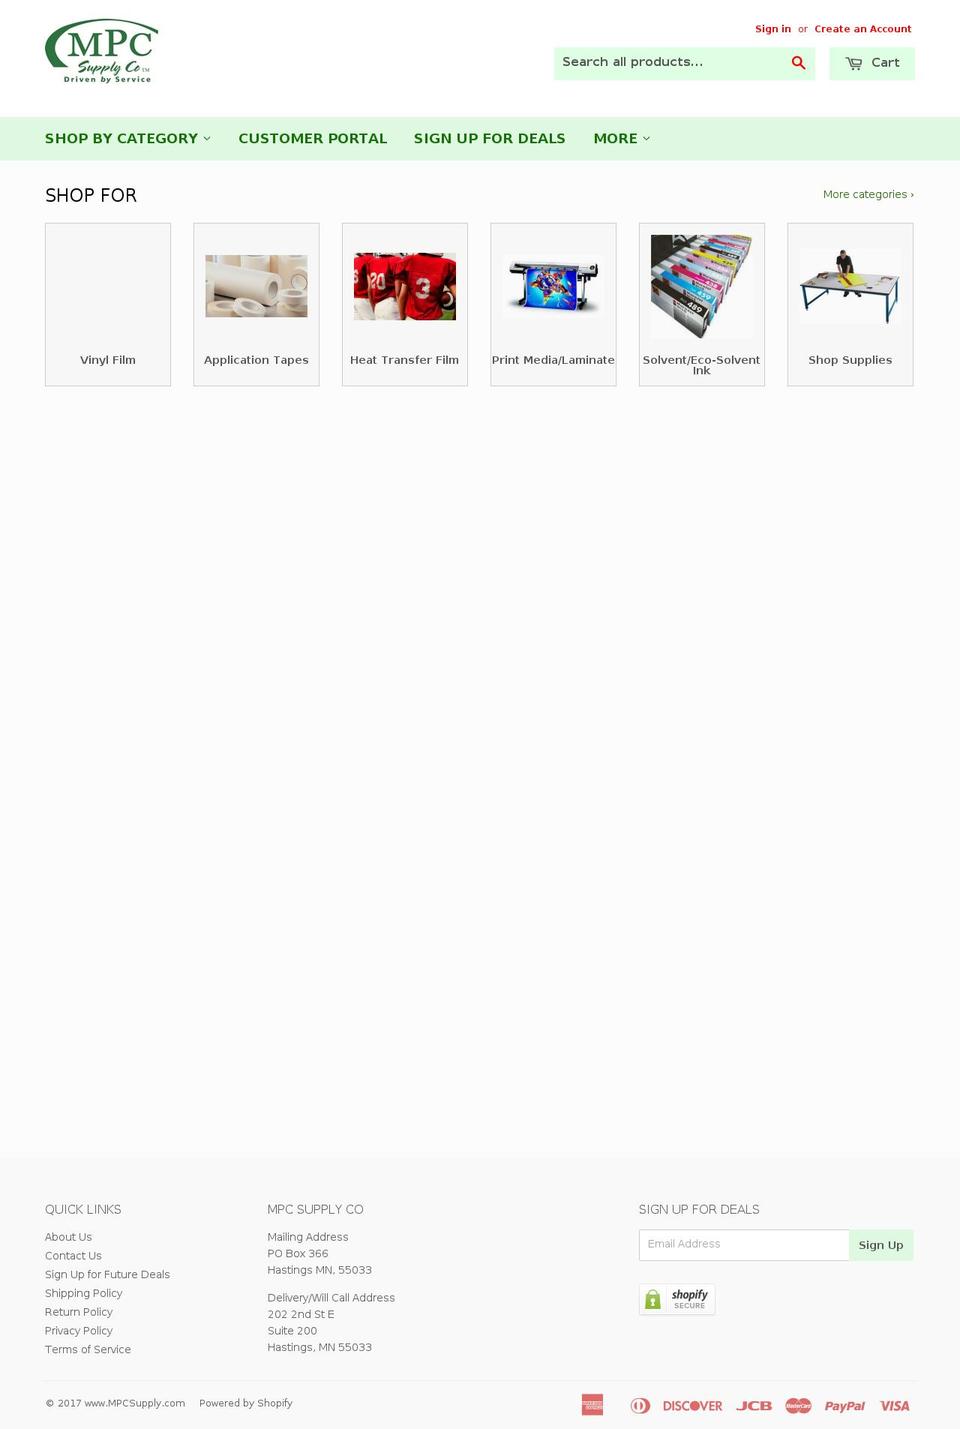 warehouse Shopify theme site example mpcsupply.com